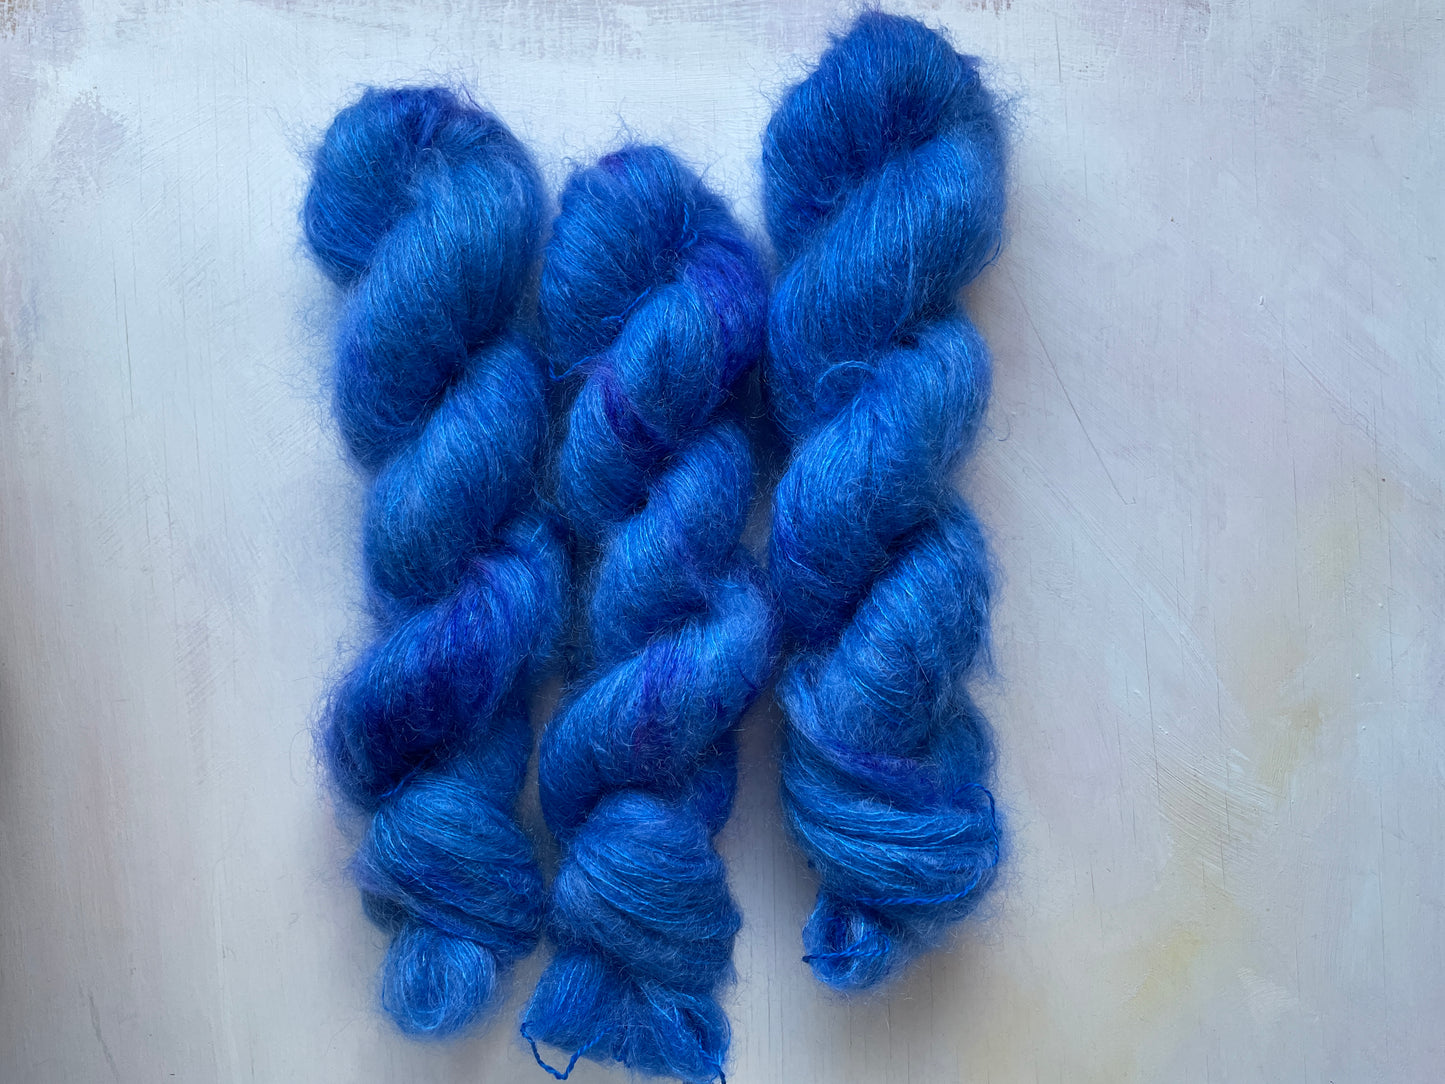 She’s Electric - Mohair Silk - Lace